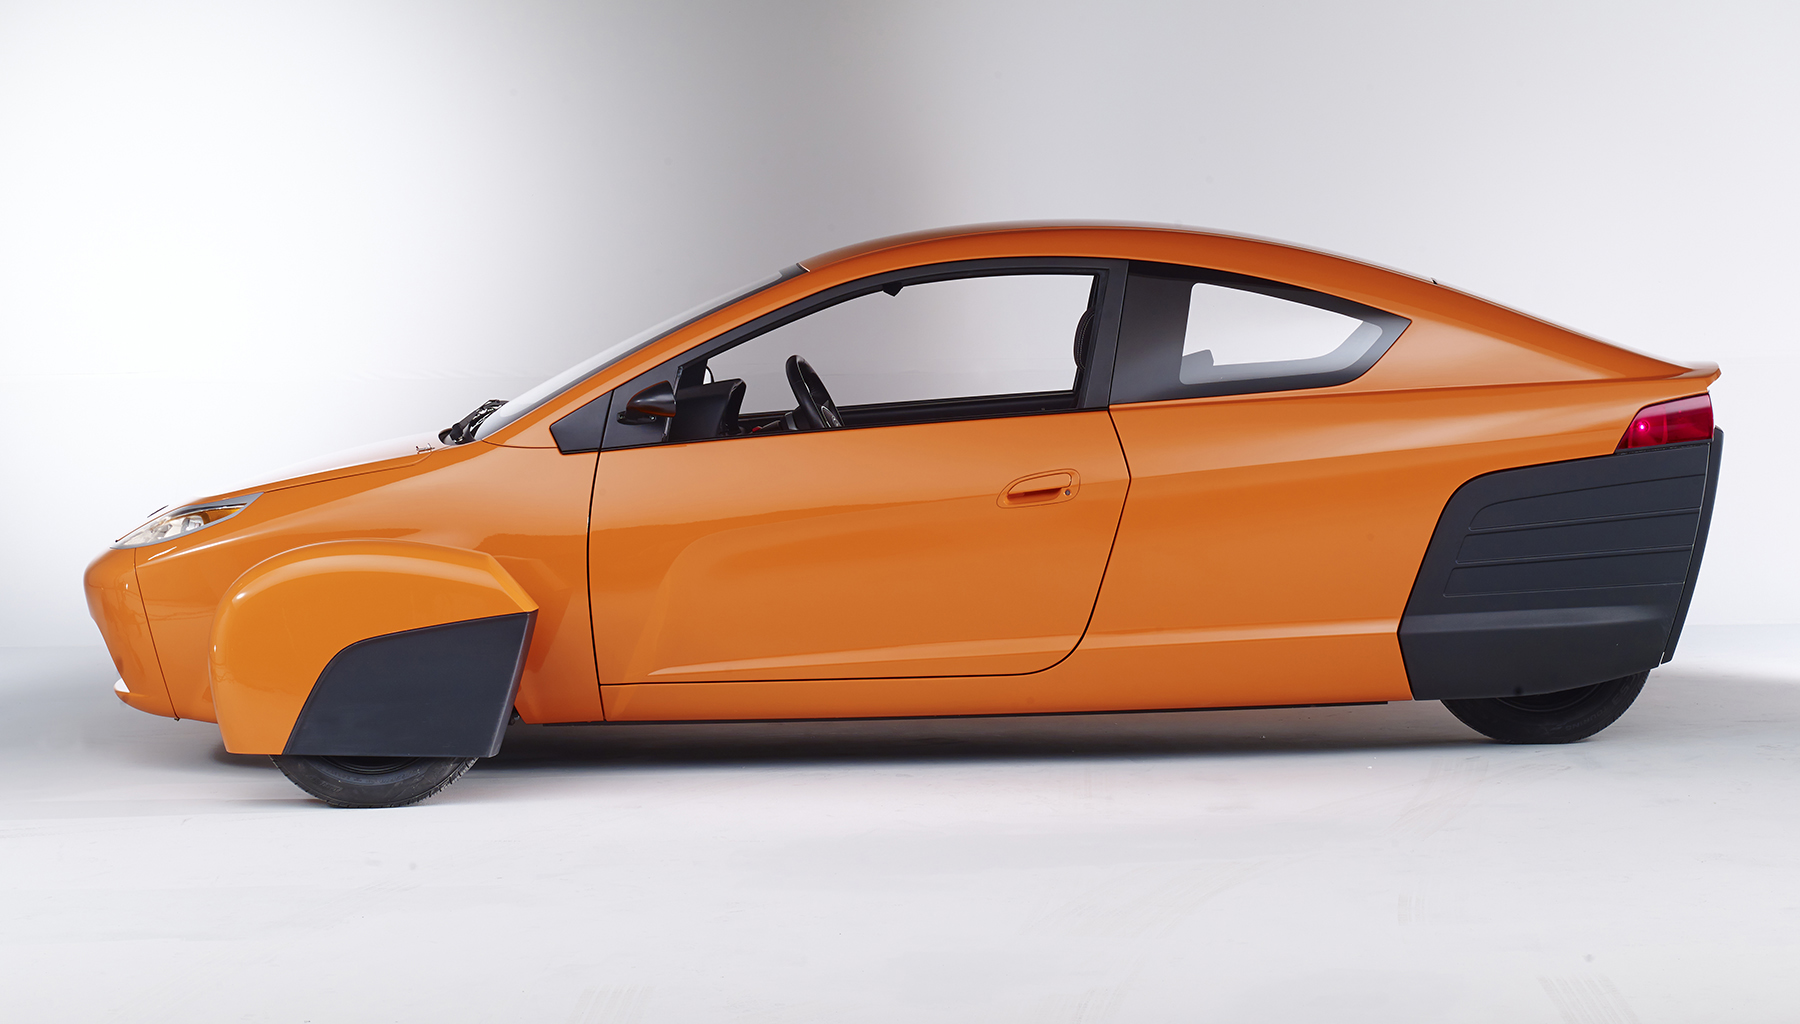 A side view of the Elio vehicle